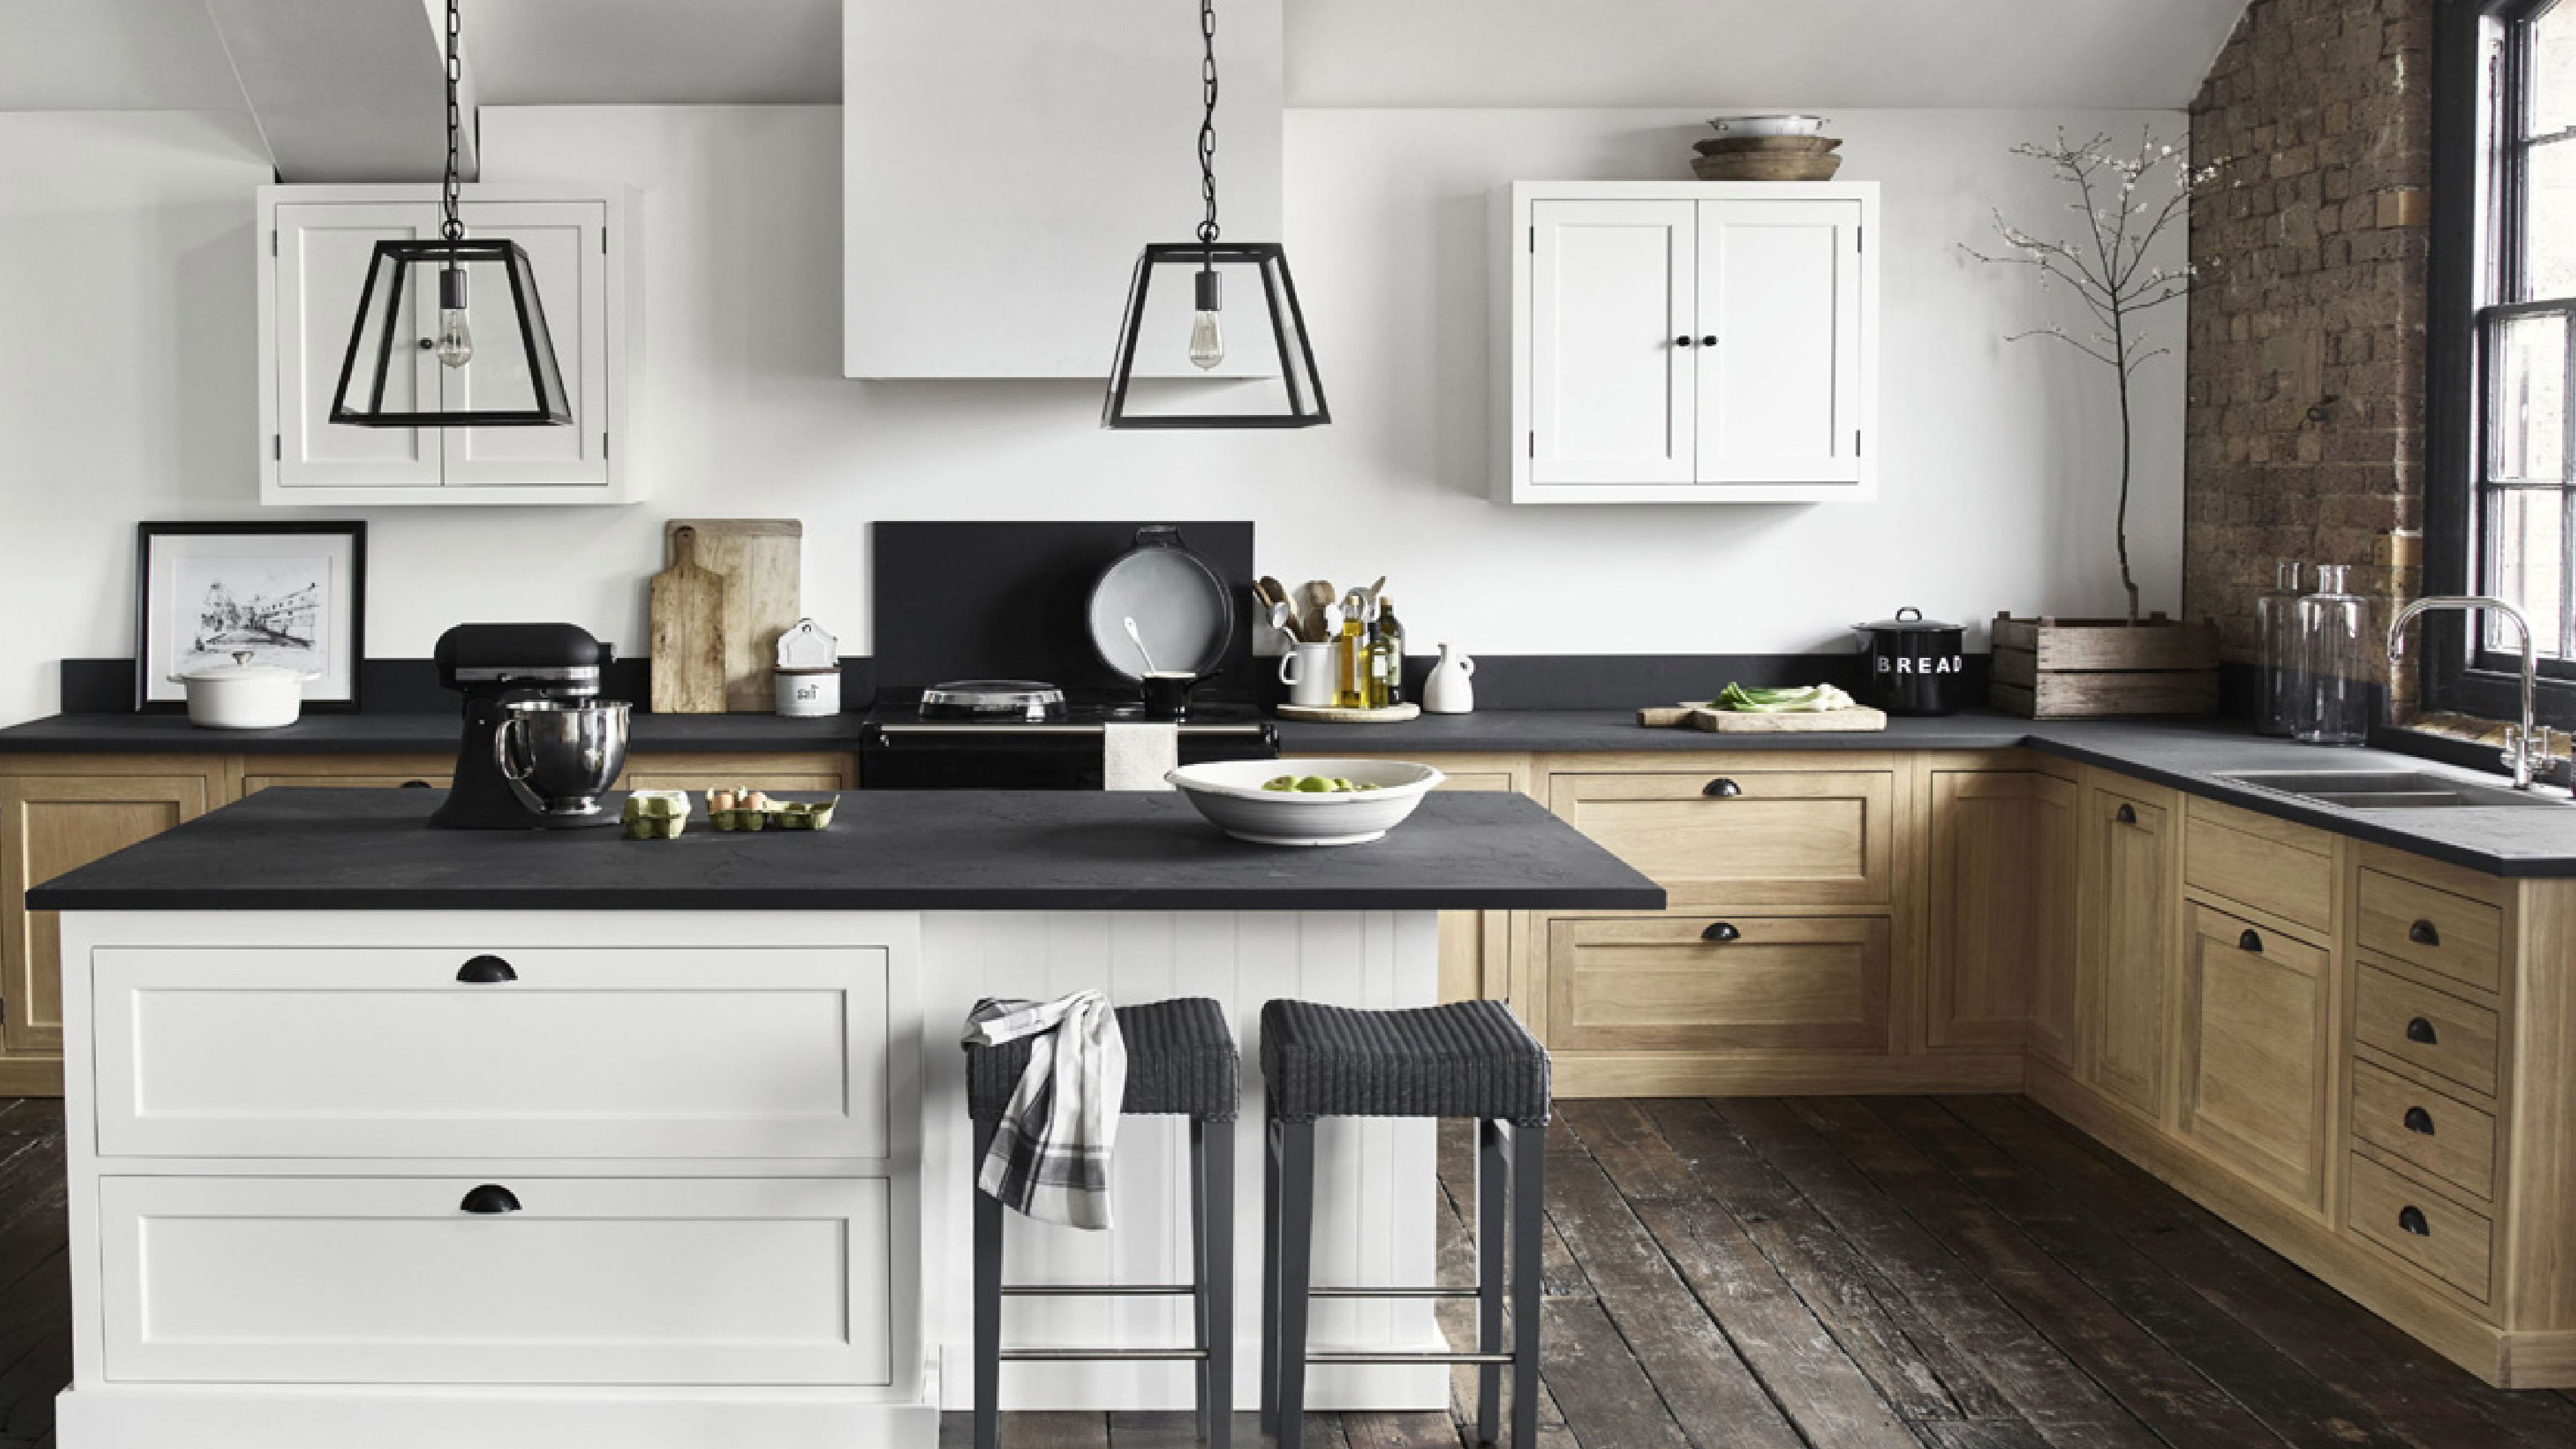 13 kitchen interior design tips from an expert – create your dream